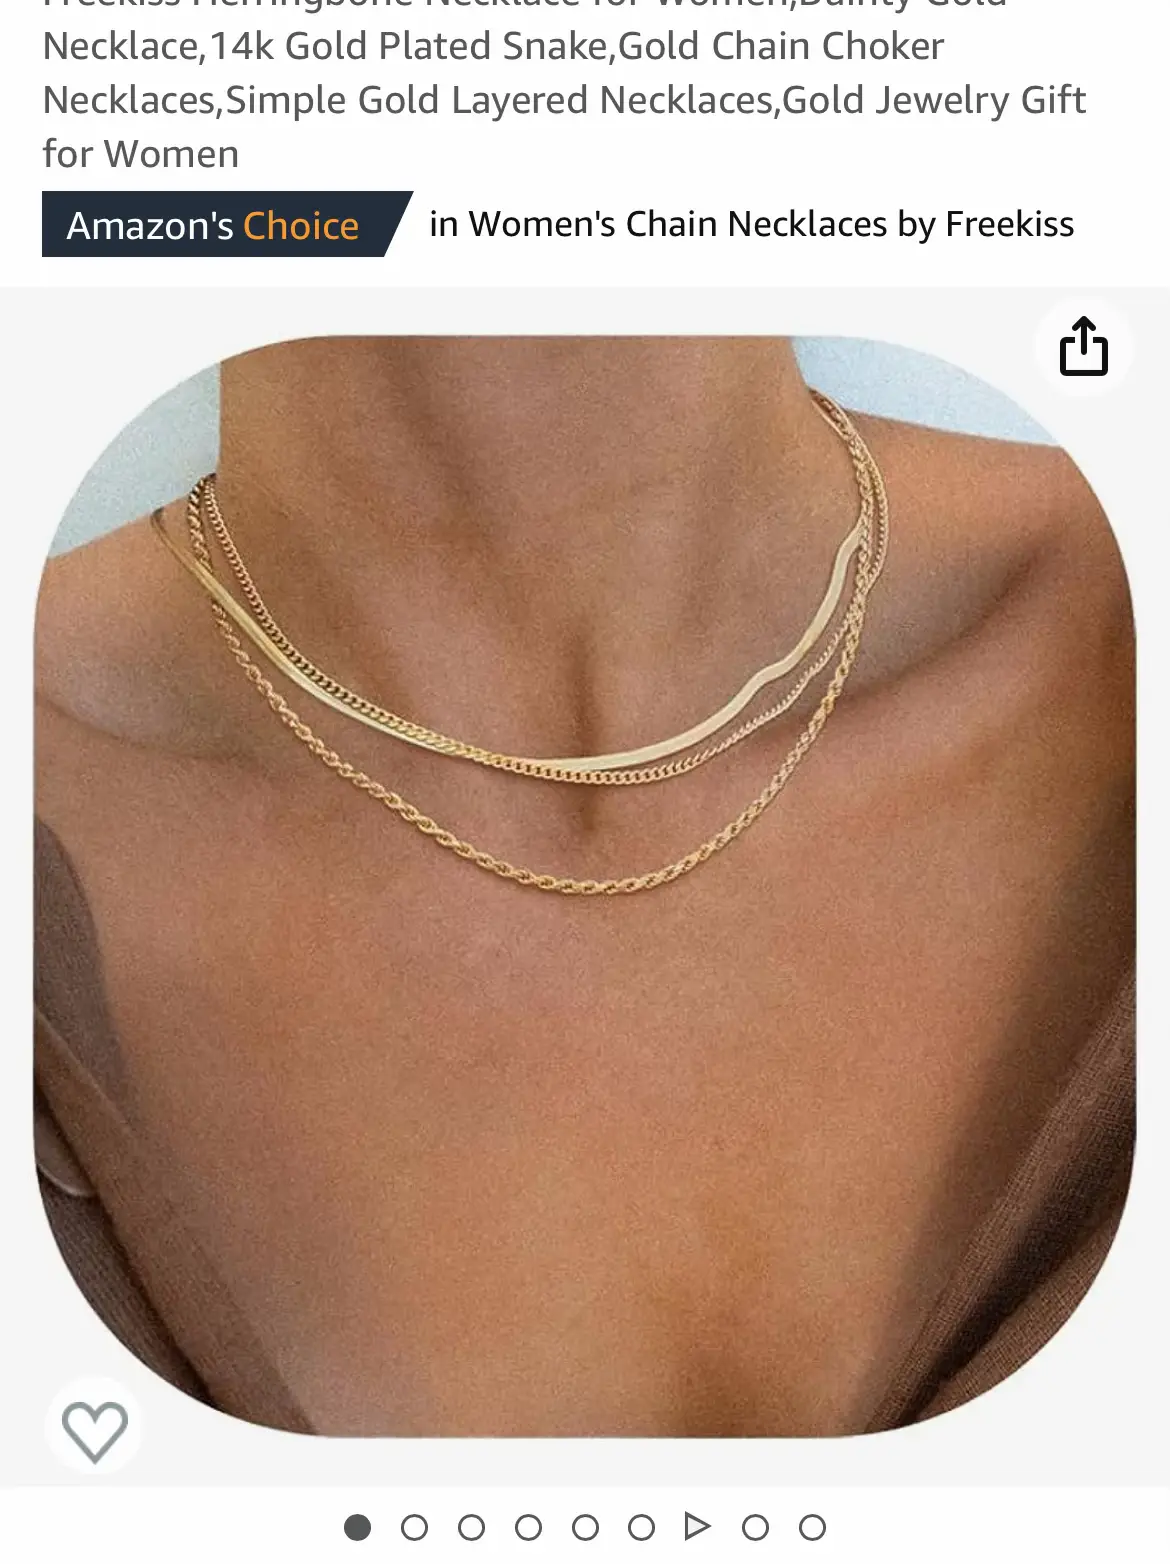  Gold Cable Link Pendant Necklace: 14k Gold Plated Loop Chain  Link Statement Choker Necklace for Women - Chunky Fashion Double Oval Hoop Pendant  Jewelry - Simple Elegant Girls Gift (Gold): Clothing